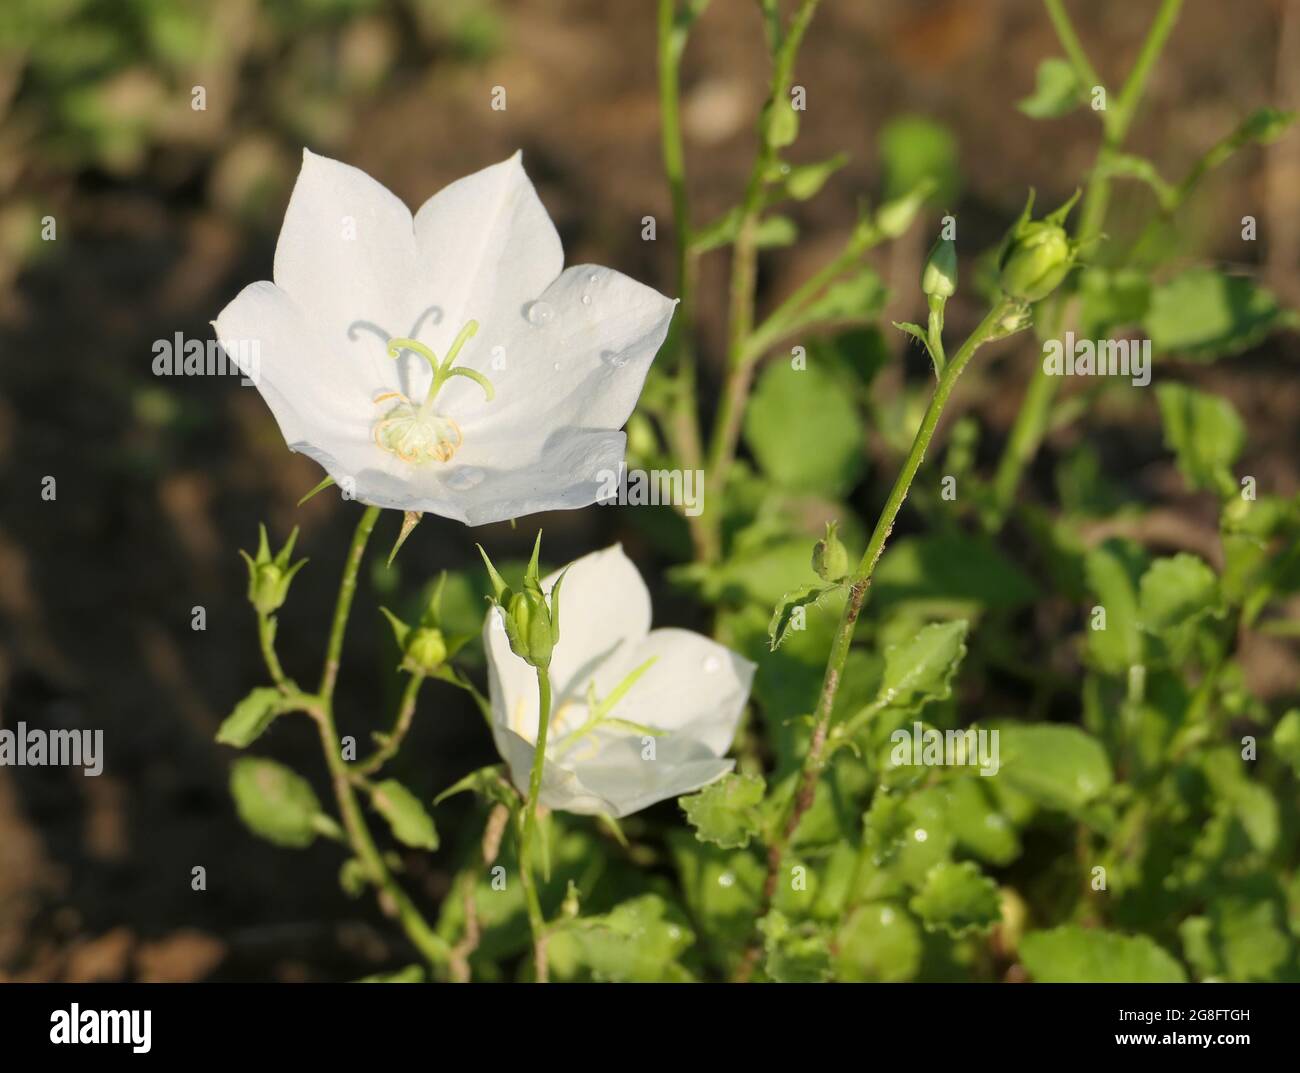 Close-up of the white flowers of Campanula carpatica 'White Clips' (Carpathian Bellflower). Off-center; copy space to the right. Stock Photo